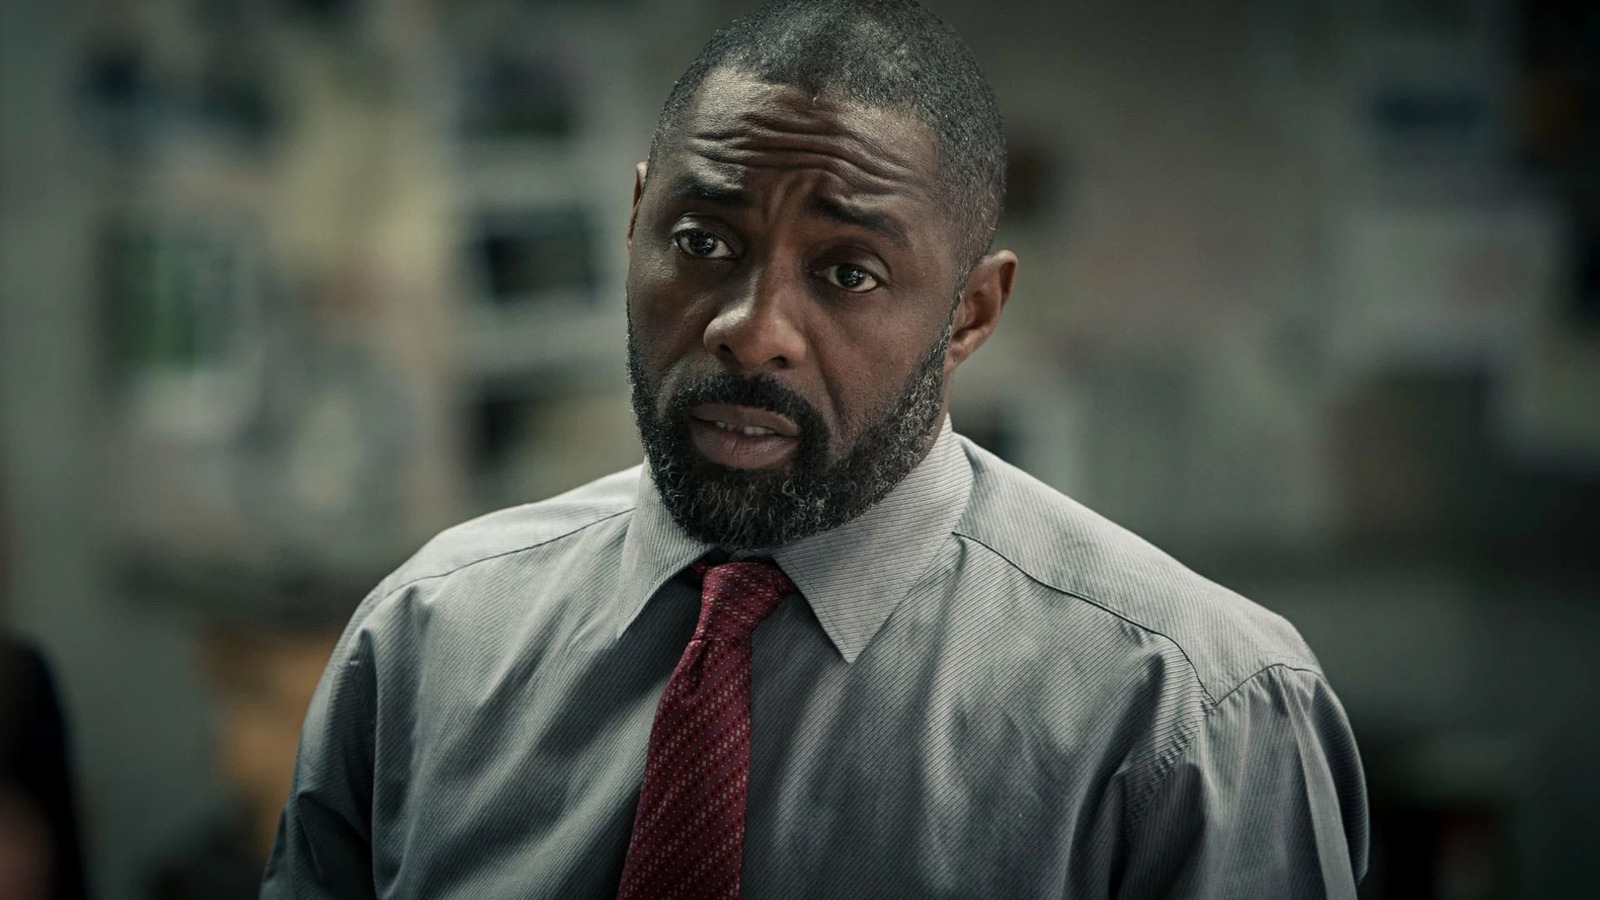 Surprise, surprise: Racists stopped Idris Elba from playing James Bond